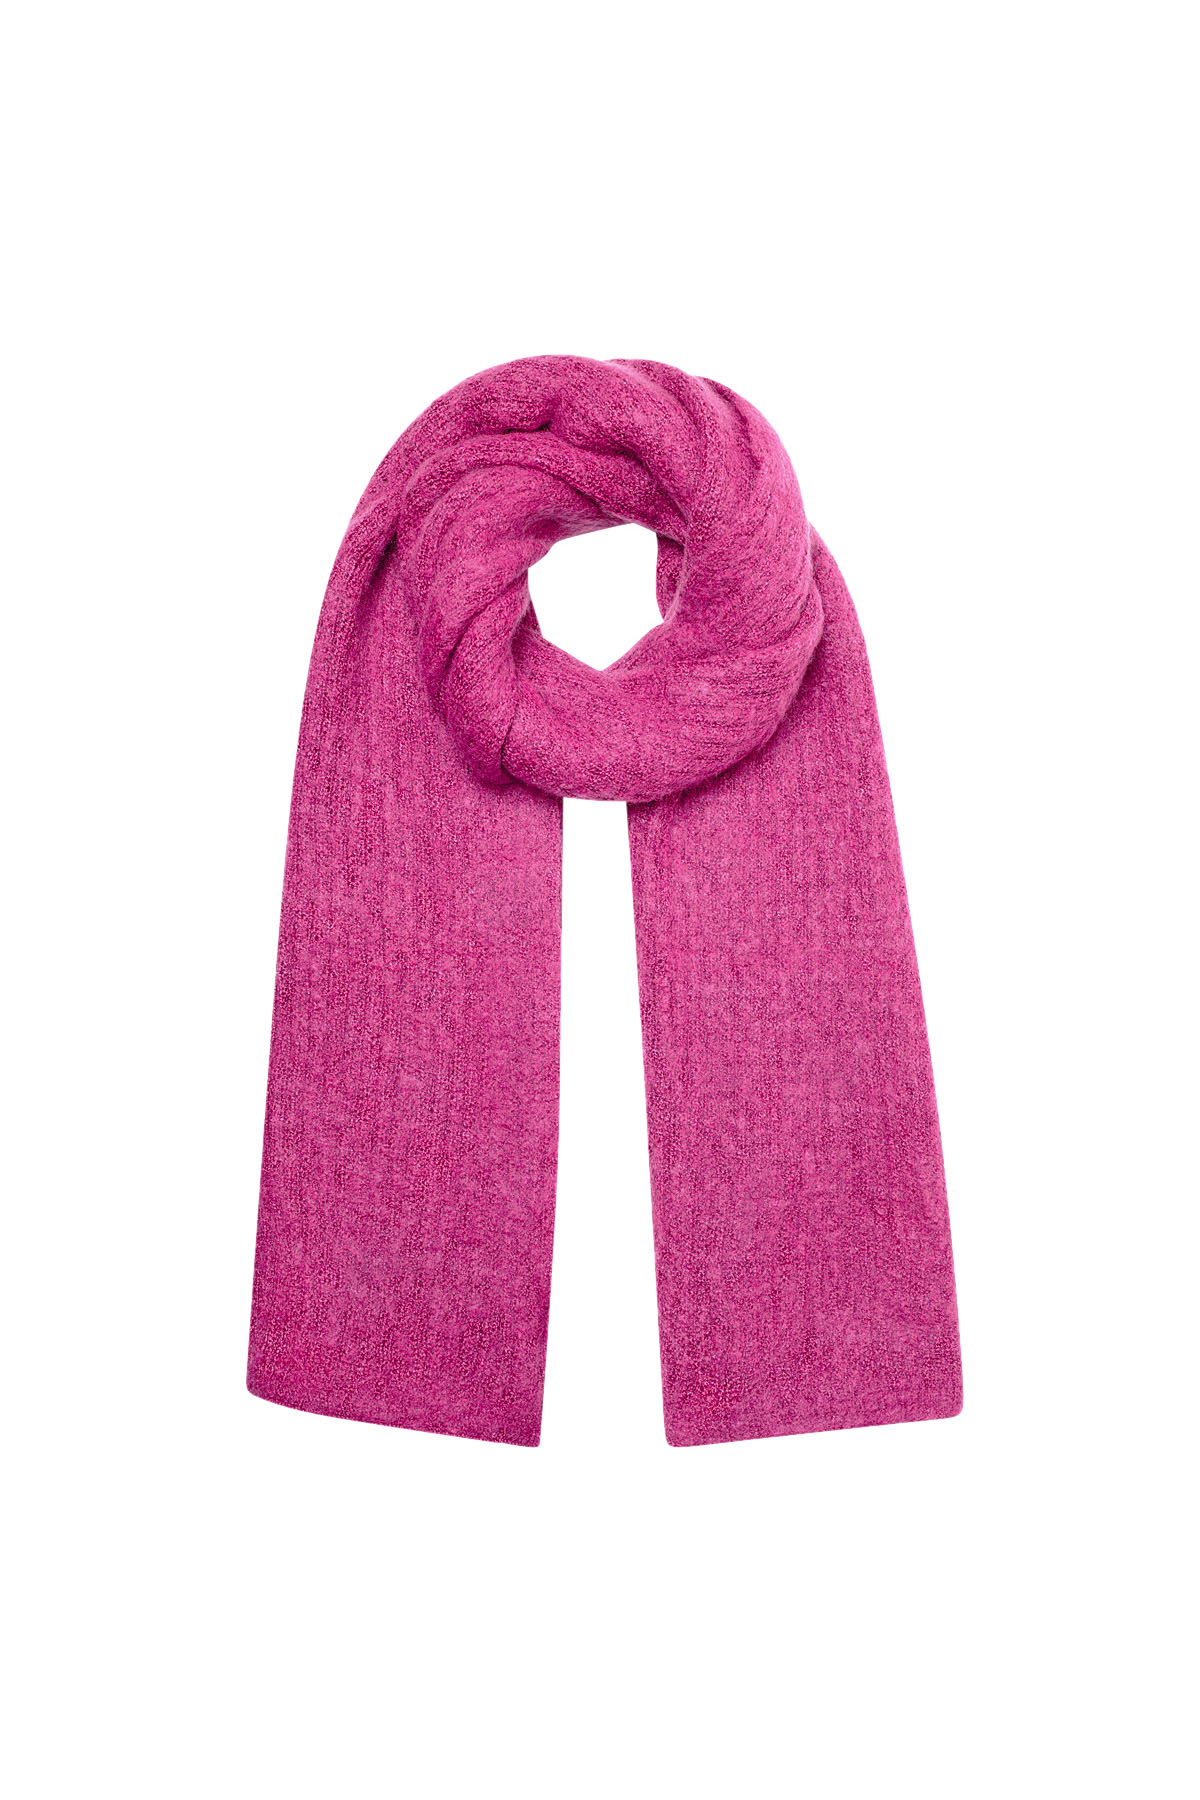 Scarf knitted plain - pink